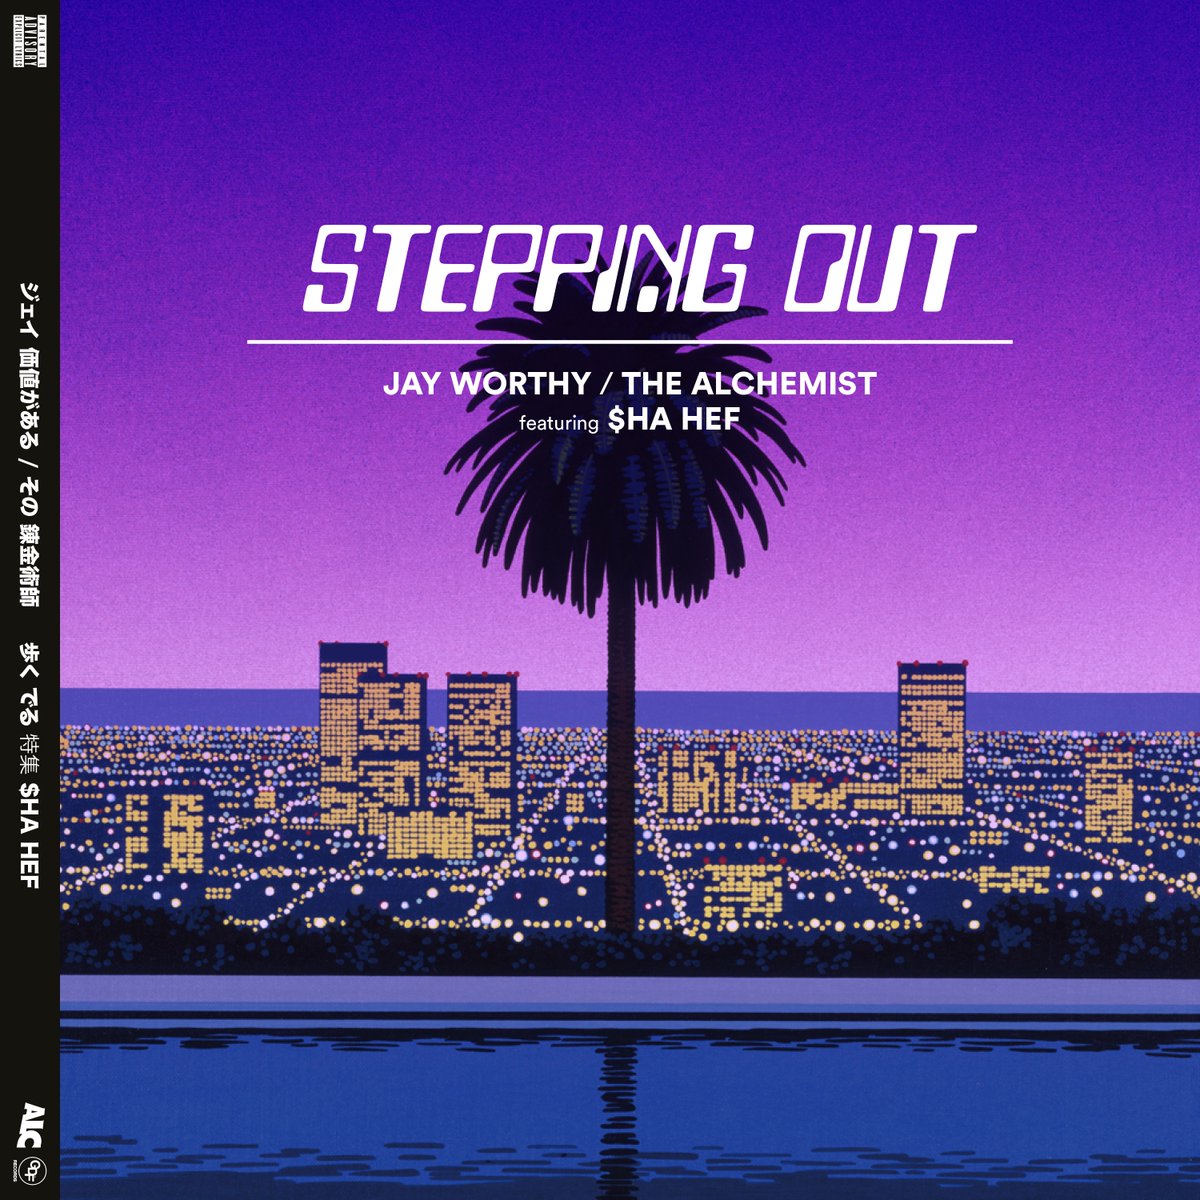 New Music: Jay Worthy & The Alchemist ft. Sha Hef – “Stepping Out” [LISTEN]